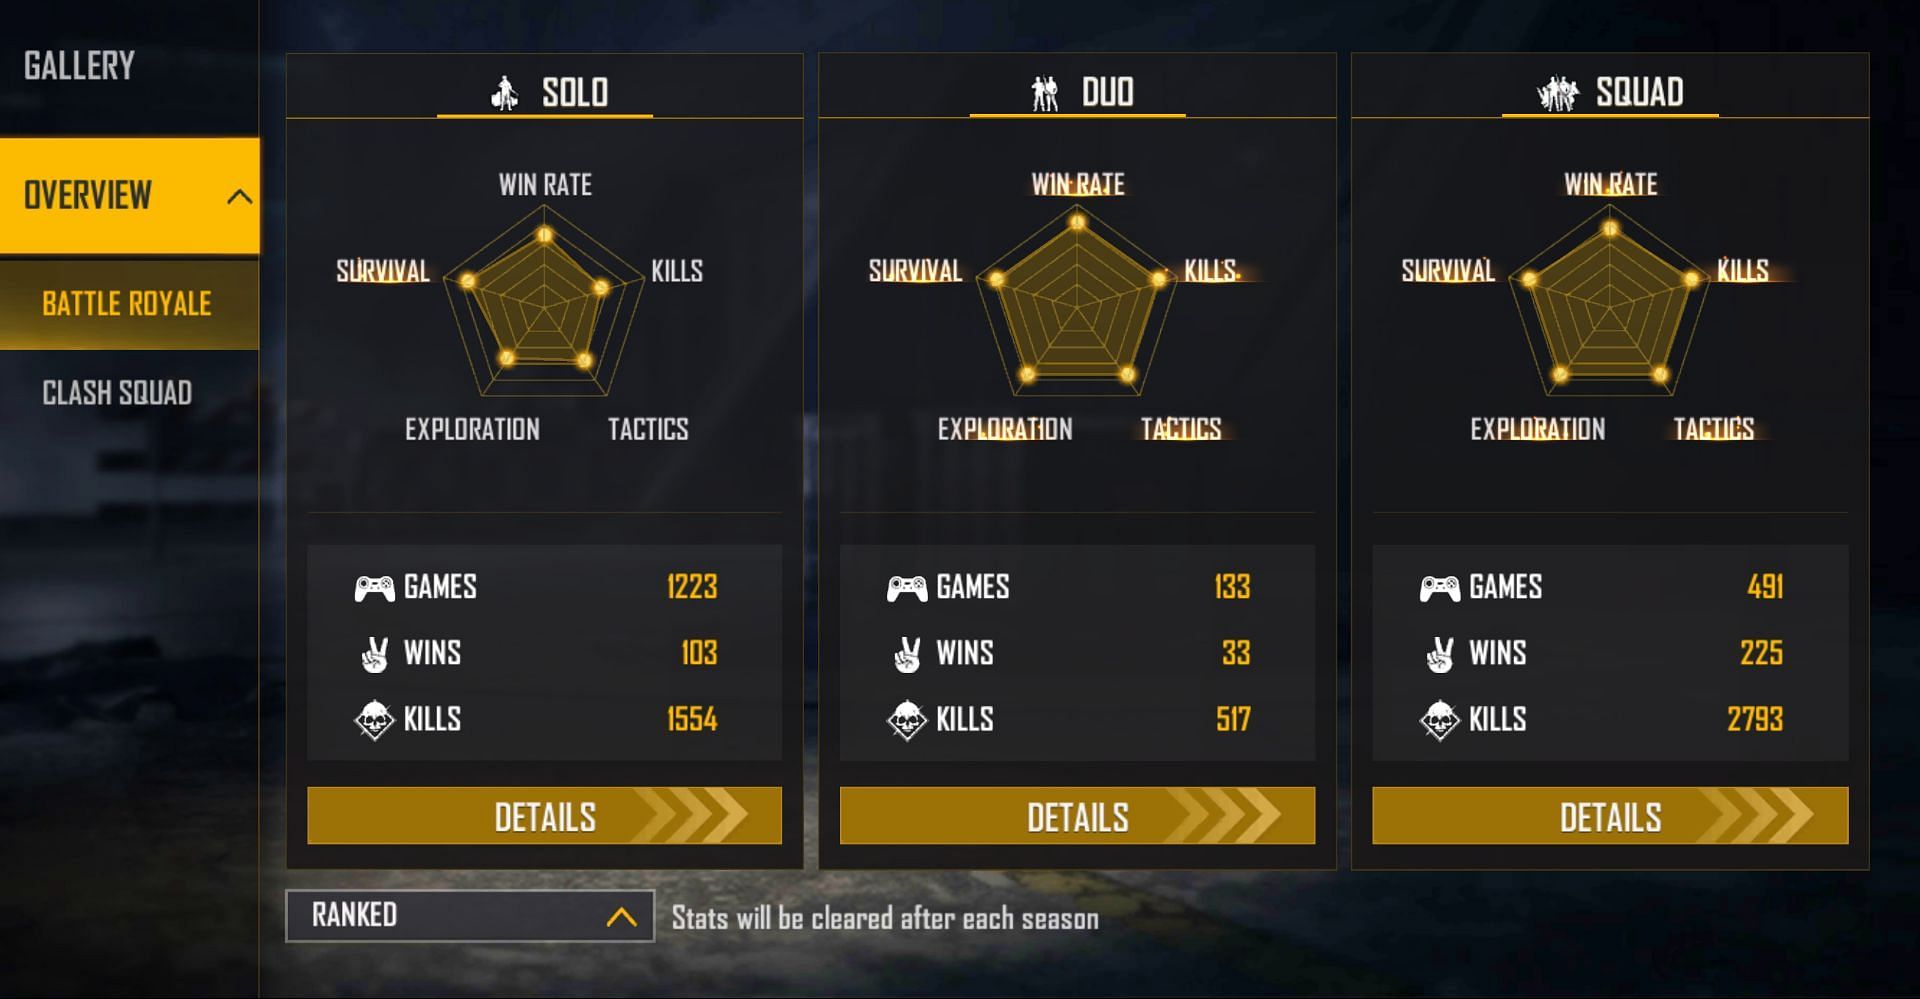 Tonde Gamer has a K/D ratio of over 10 in the squad games (Image via Free Fire)